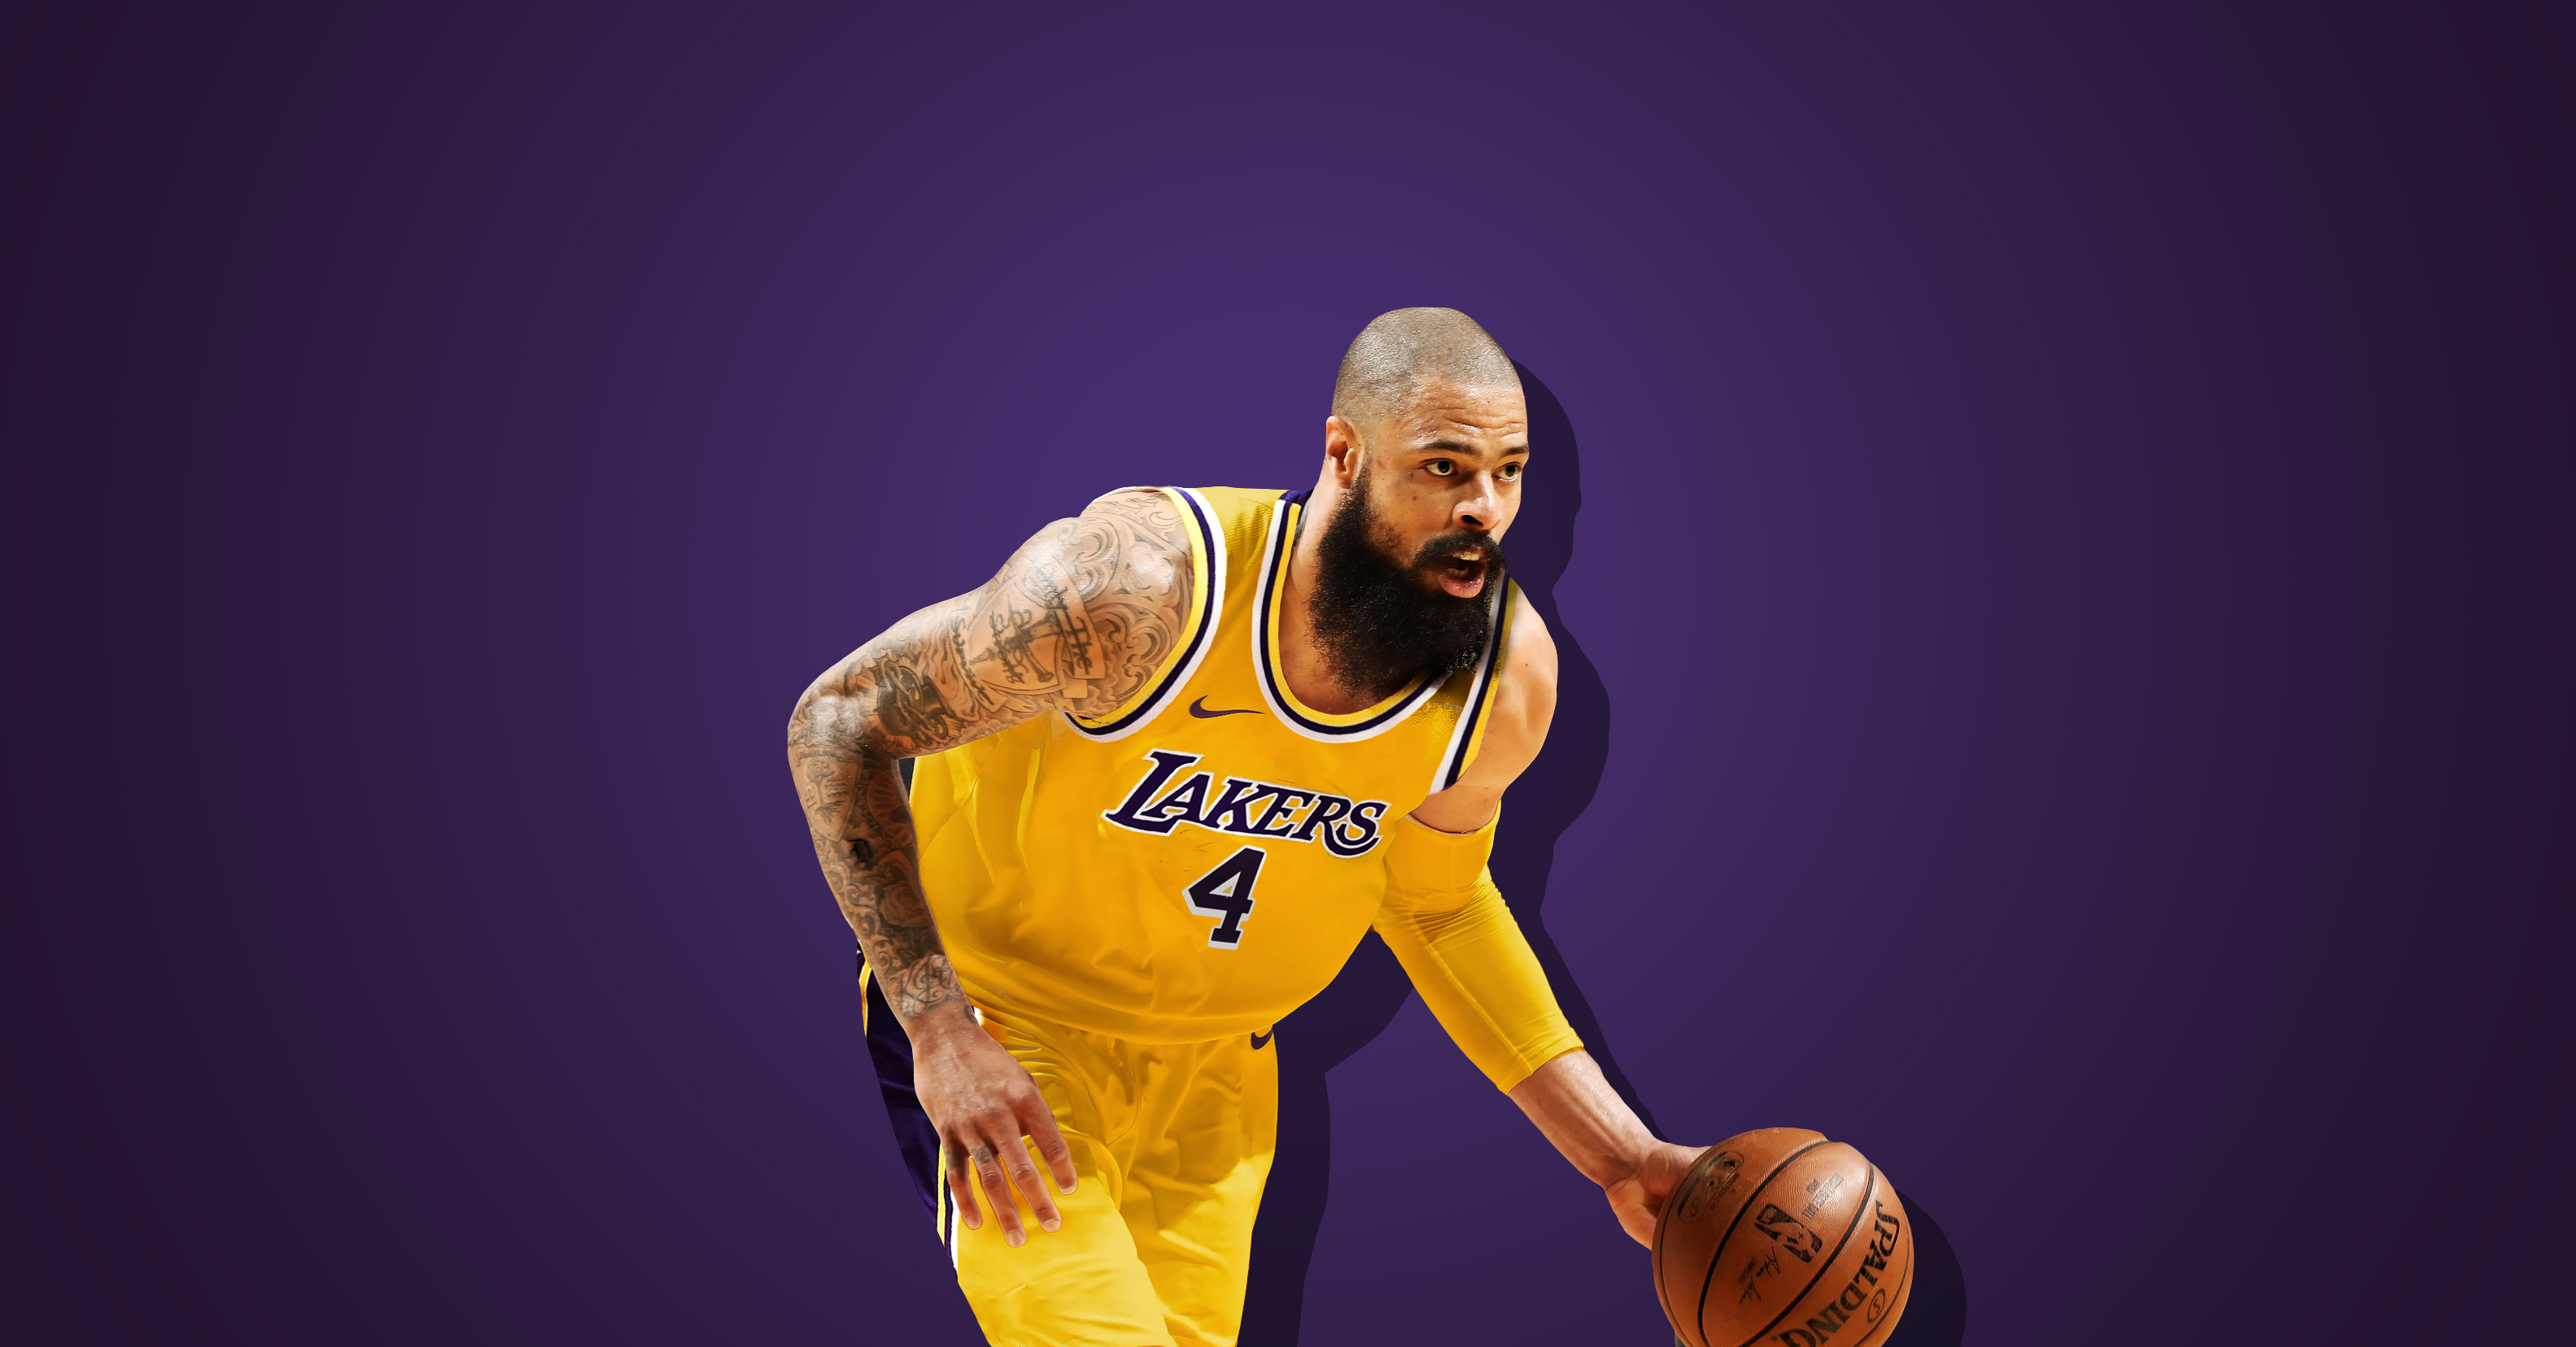 Tyson Chandler had to choose between the Lakers and the Warriors